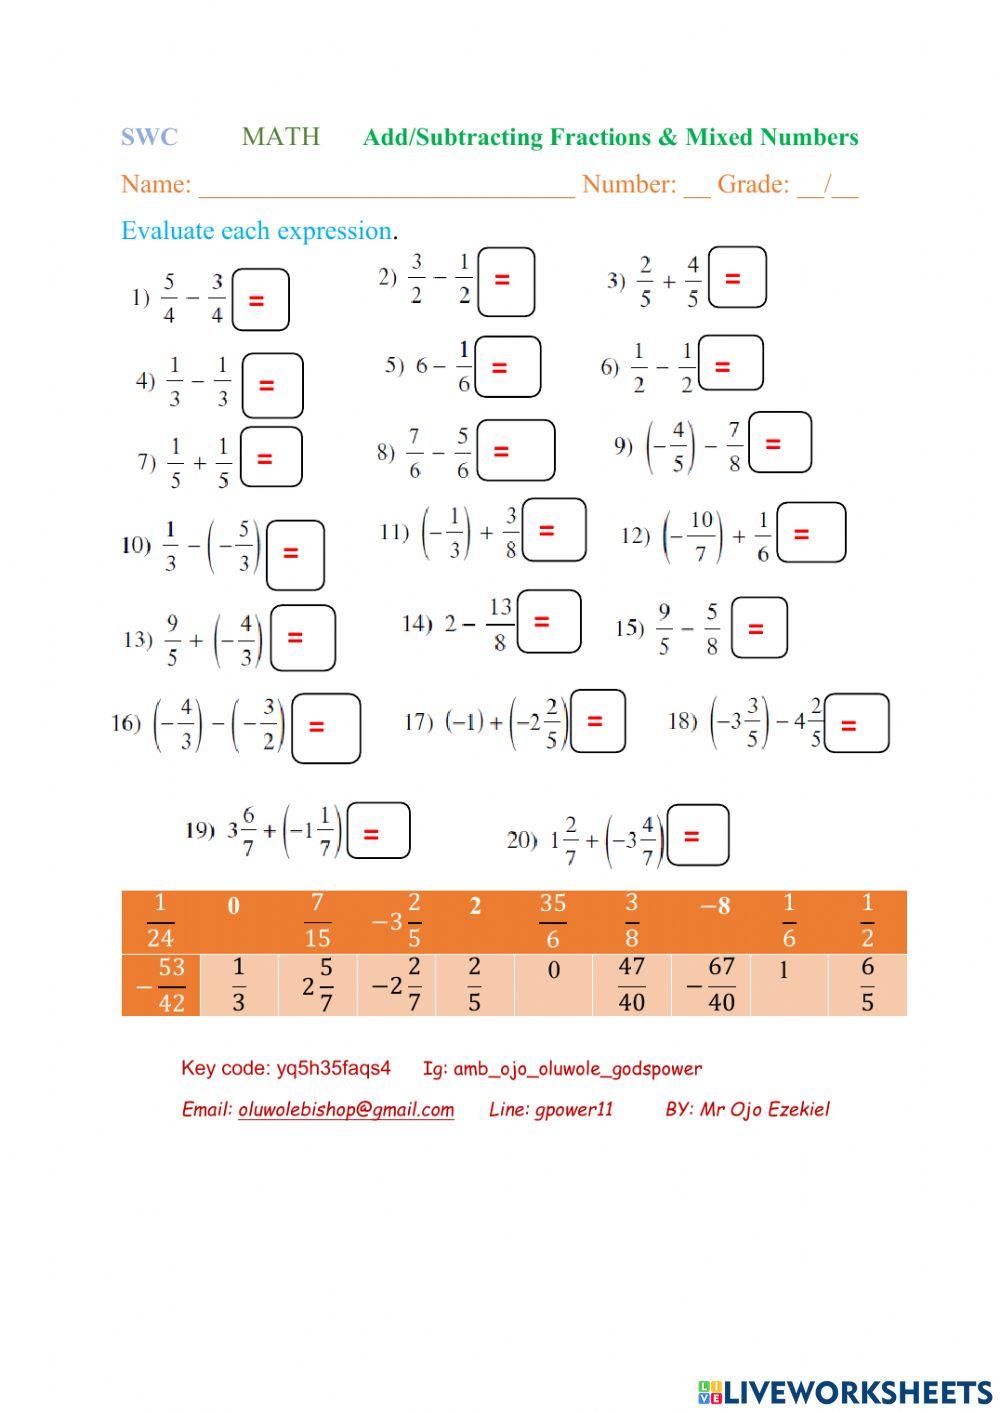 Add-Subtracting Fractions & Mixed Numbers GSCE 6 & 7